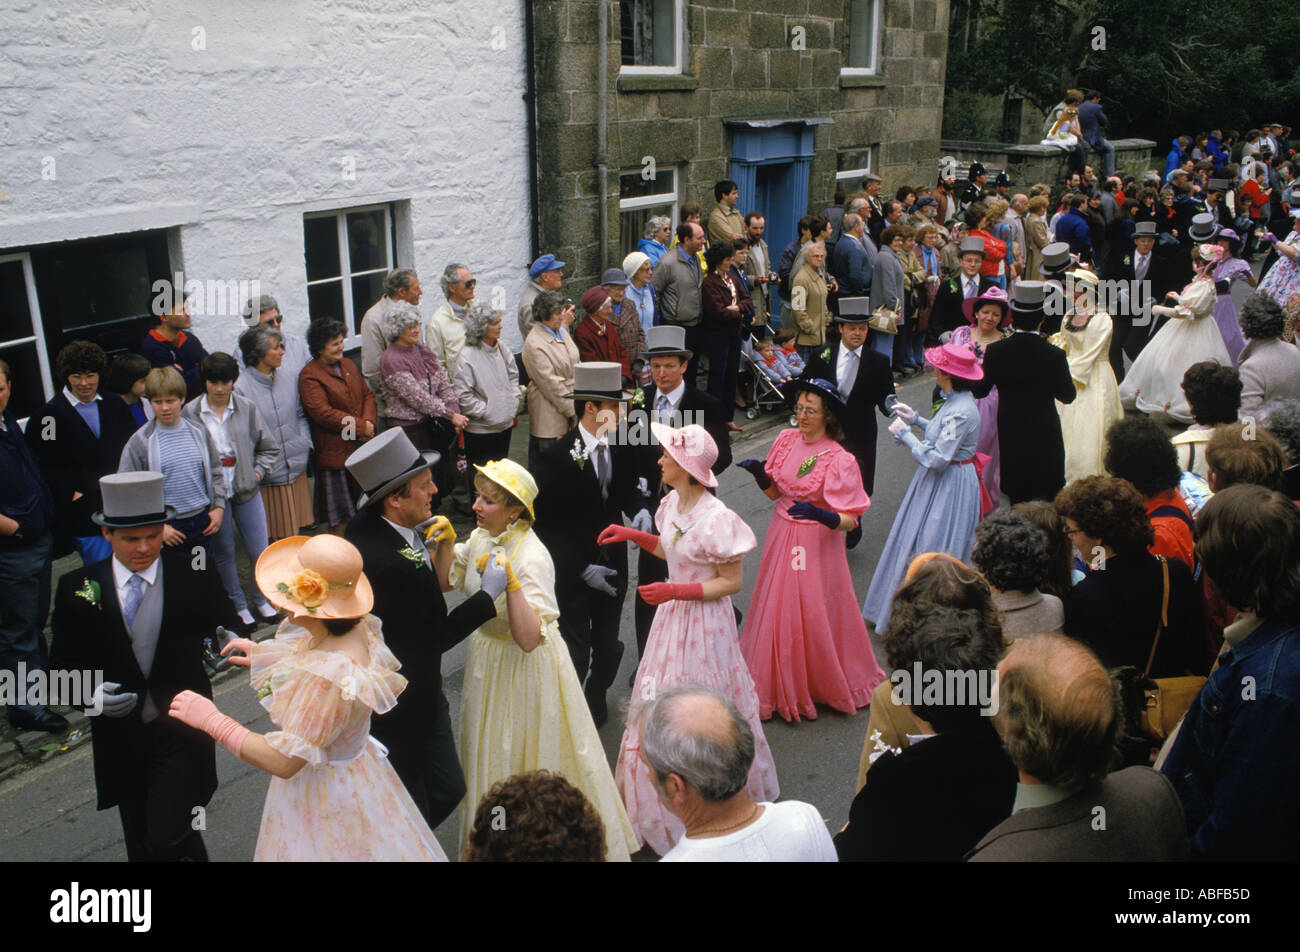 Helston Furry dance Helston Cornwall England Flora Day 8th May.  Midday formal dance main dance of the day. 1989 1980s UK HOMER SYKES Stock Photo